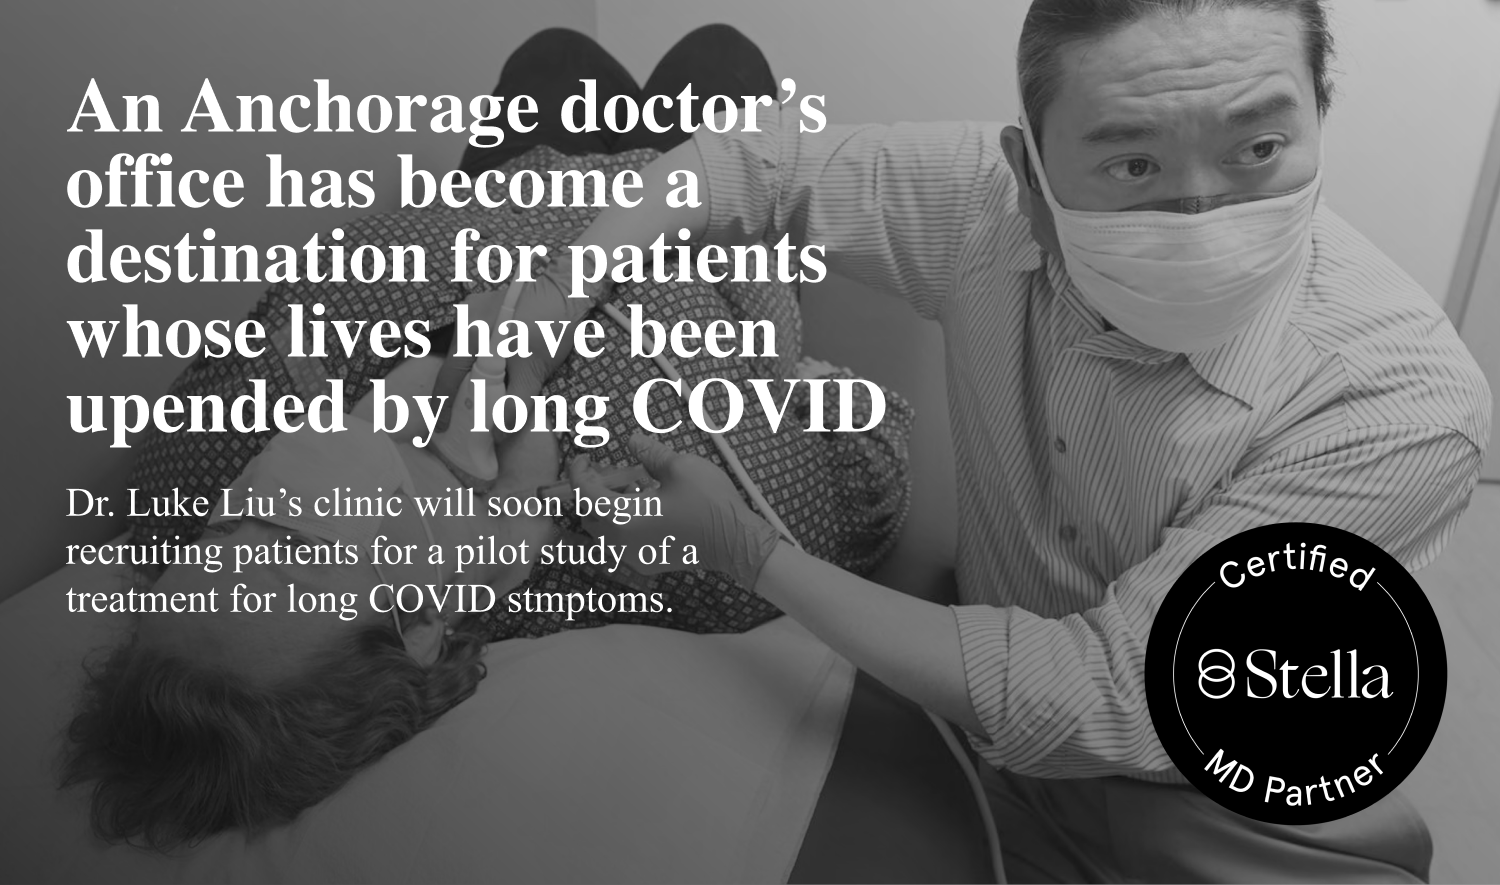 Stella Certified Provider: Anchorage doctor's office has become a destination for patients whose lives have been upended by long COVID